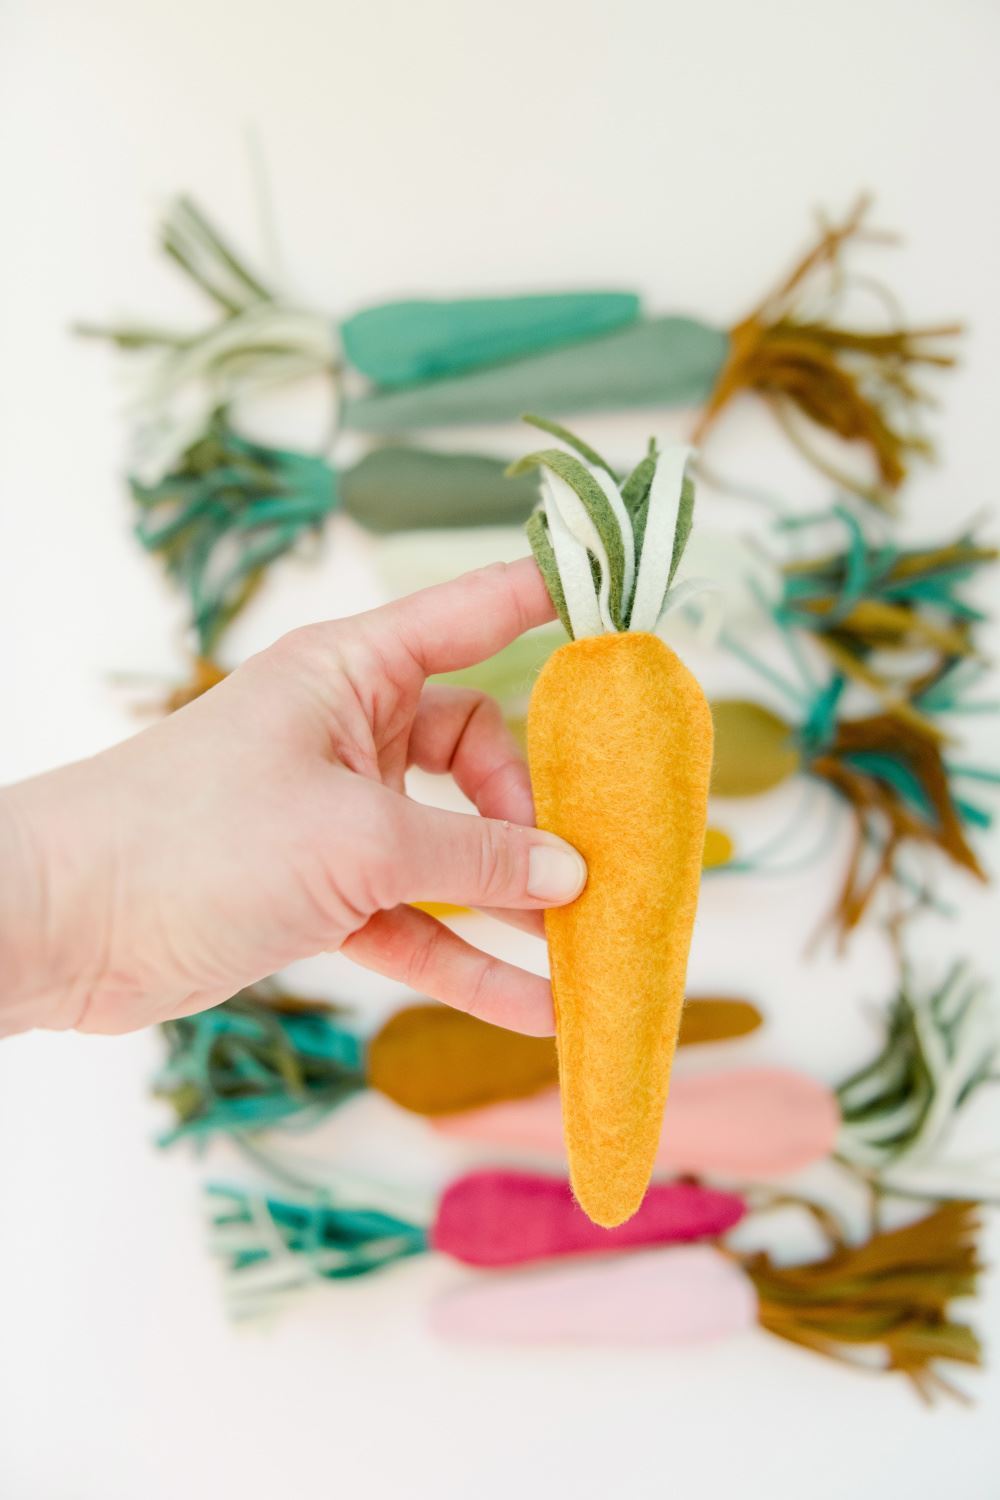 DIY Easter Décor: Colorful No-Sew Felt Carrots with Aleene’s Fabric Fusion Tape